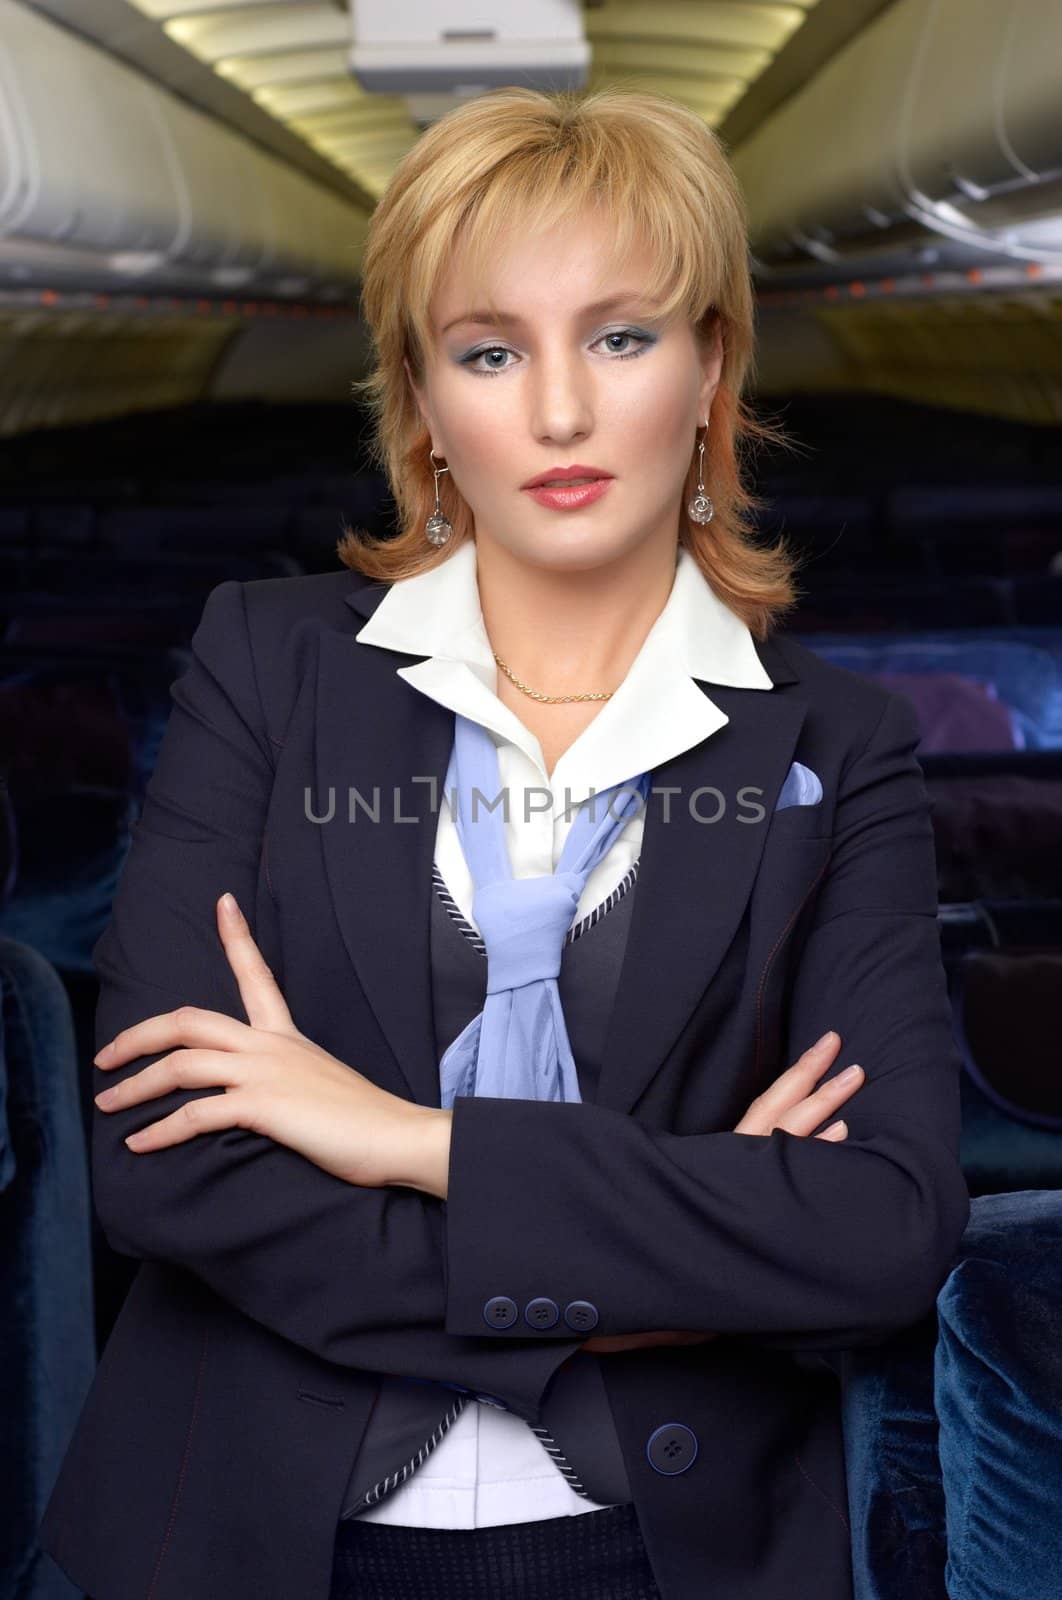 blond air hostess by starush